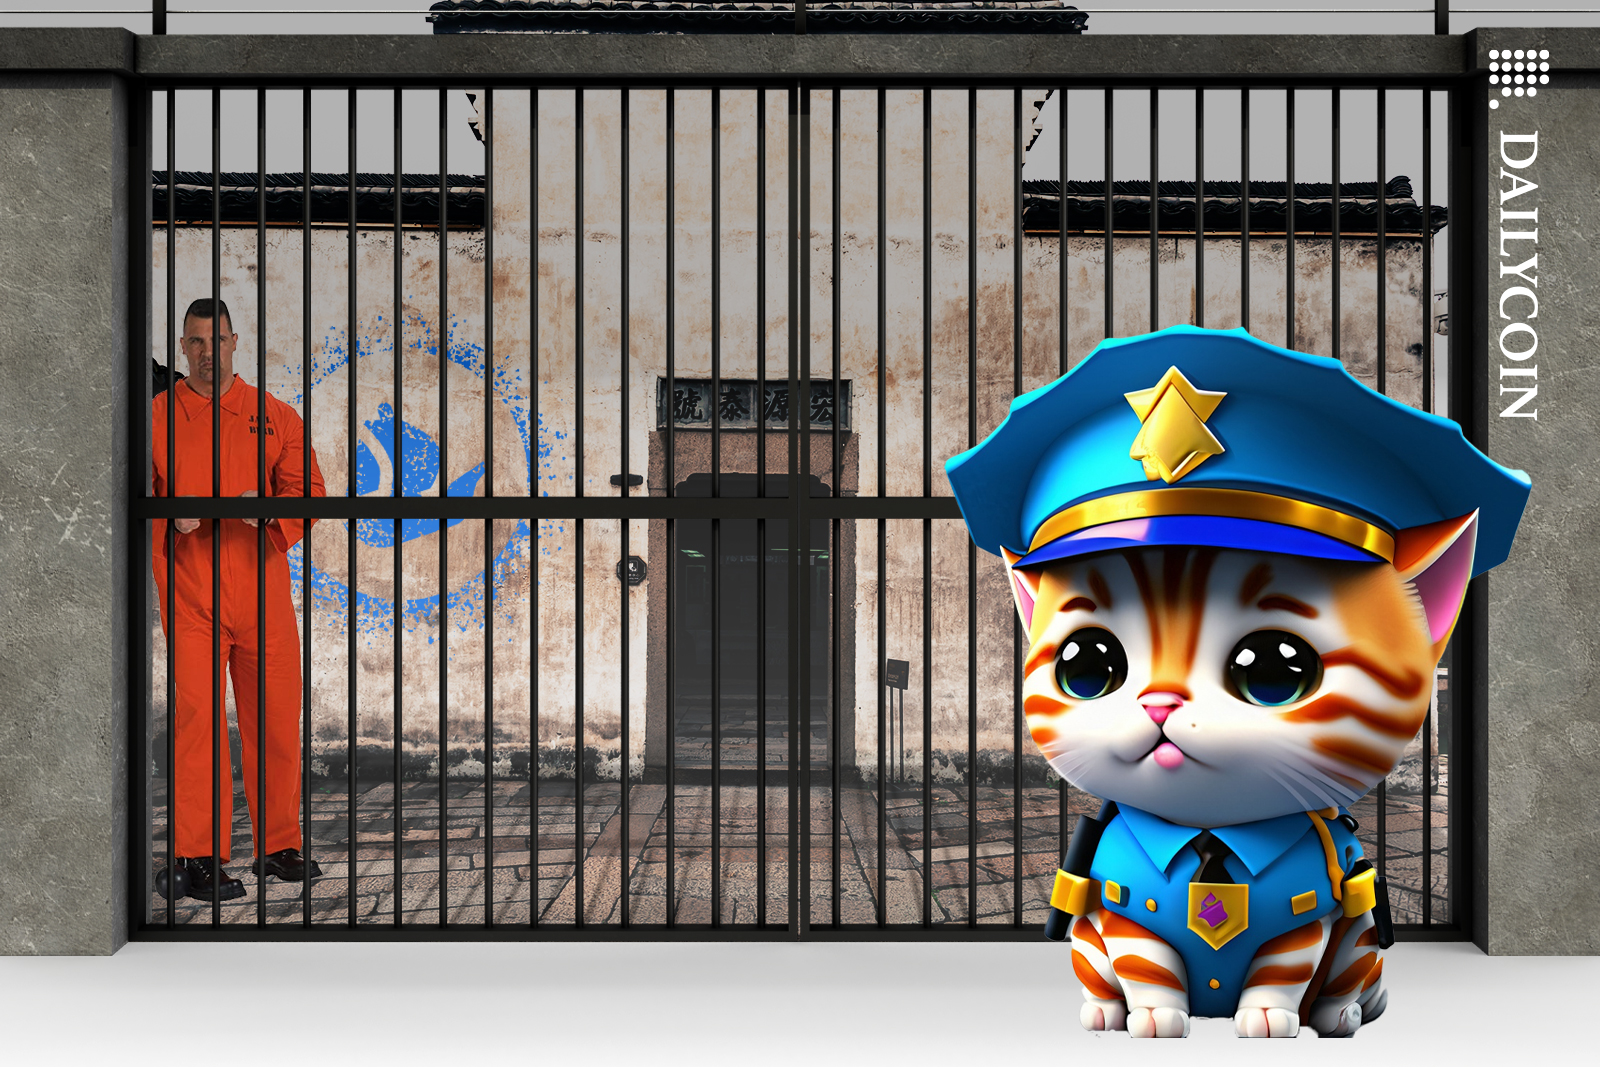 Man in open sea prison, NTF police kitty is guarding the gates.